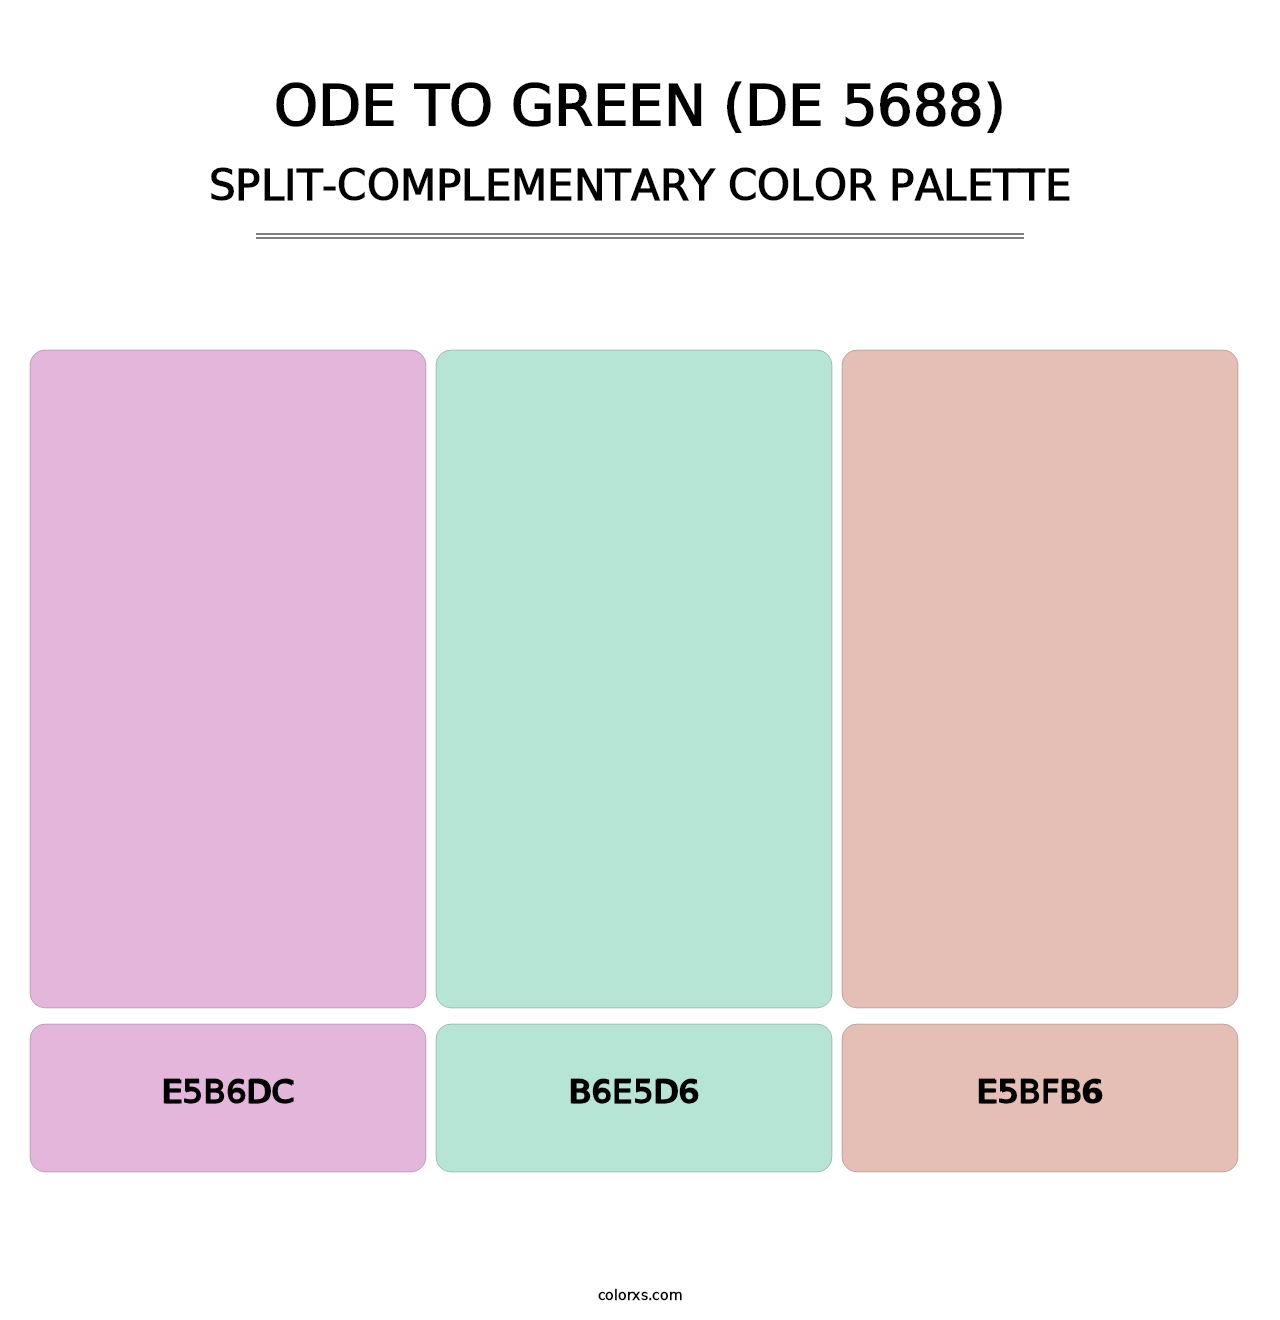 Ode to Green (DE 5688) - Split-Complementary Color Palette